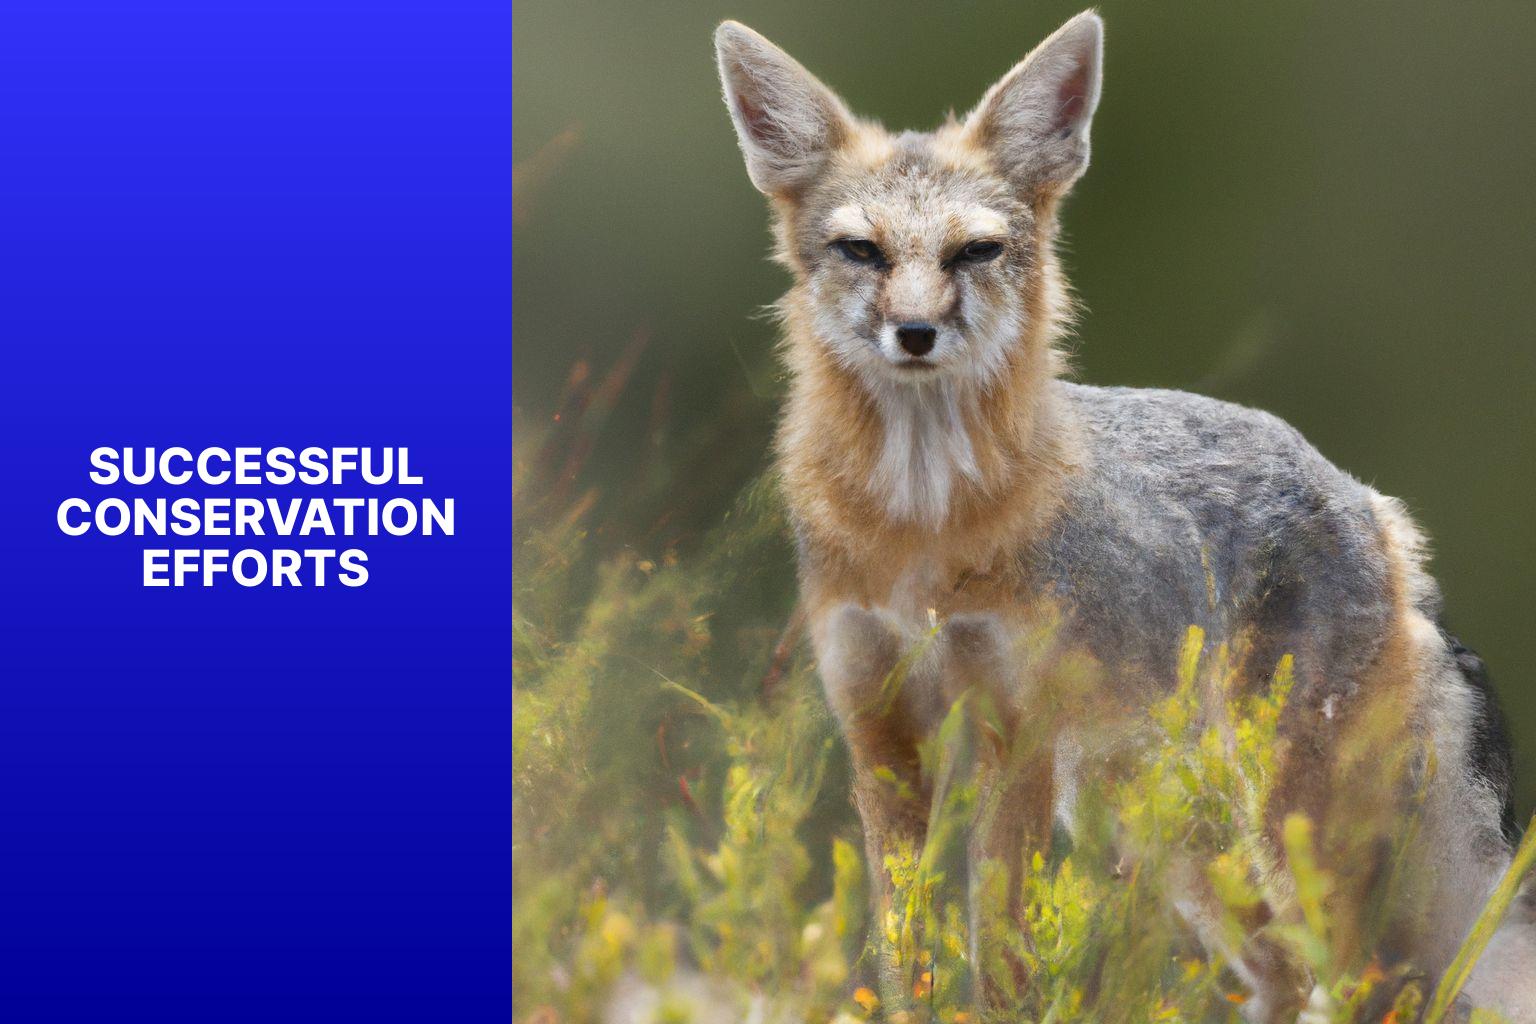 Successful Conservation Efforts - Kit Fox in Environmental Policy 